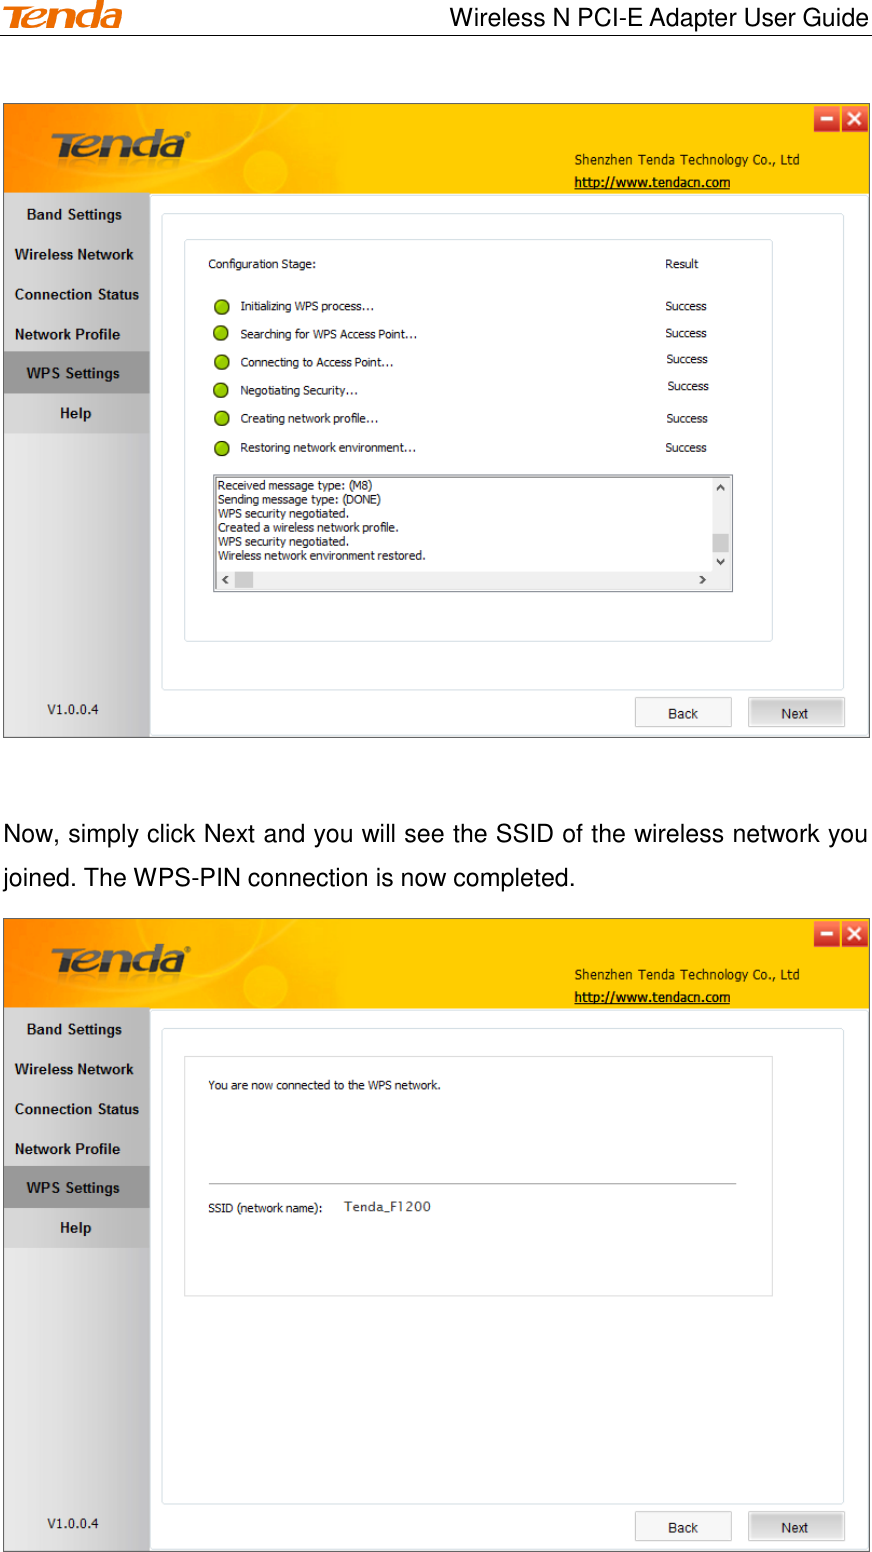                                    Wireless N PCI-E Adapter User Guide   Now, simply click Next and you will see the SSID of the wireless network you joined. The WPS-PIN connection is now completed.  